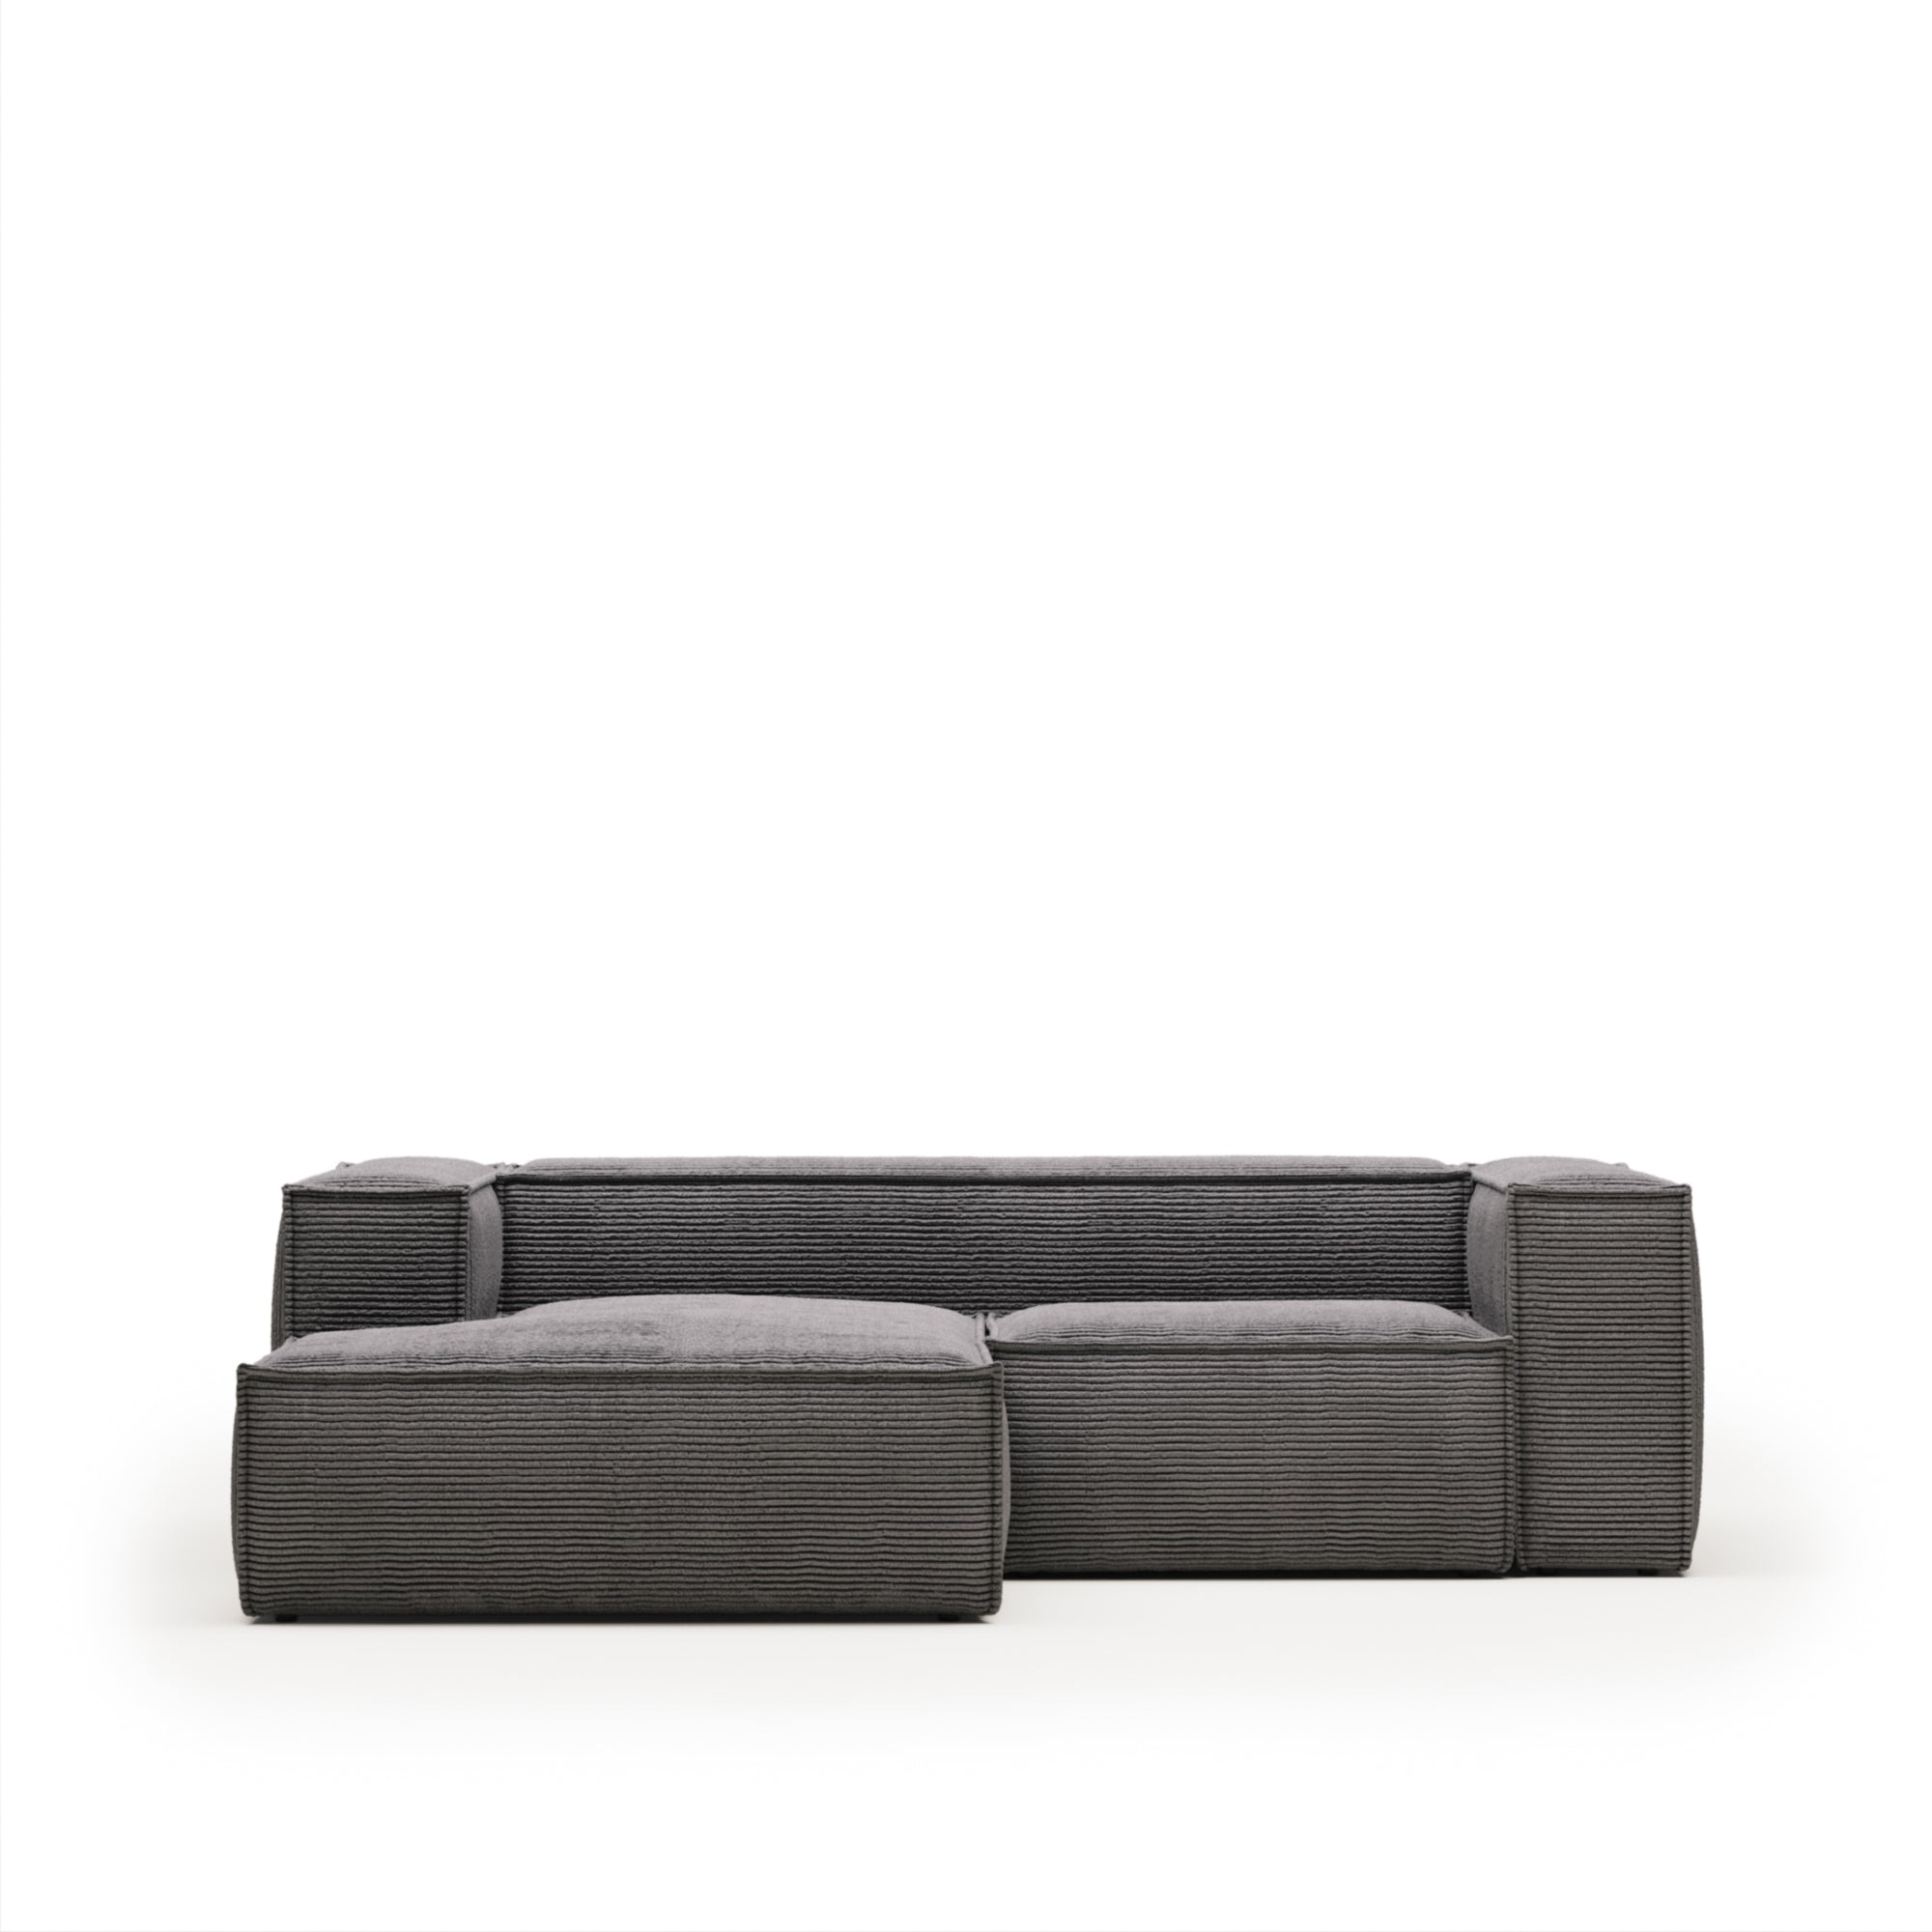 Blok 2 seater sofa with left side chaise longue in grey wide seam corduroy, 240 cm